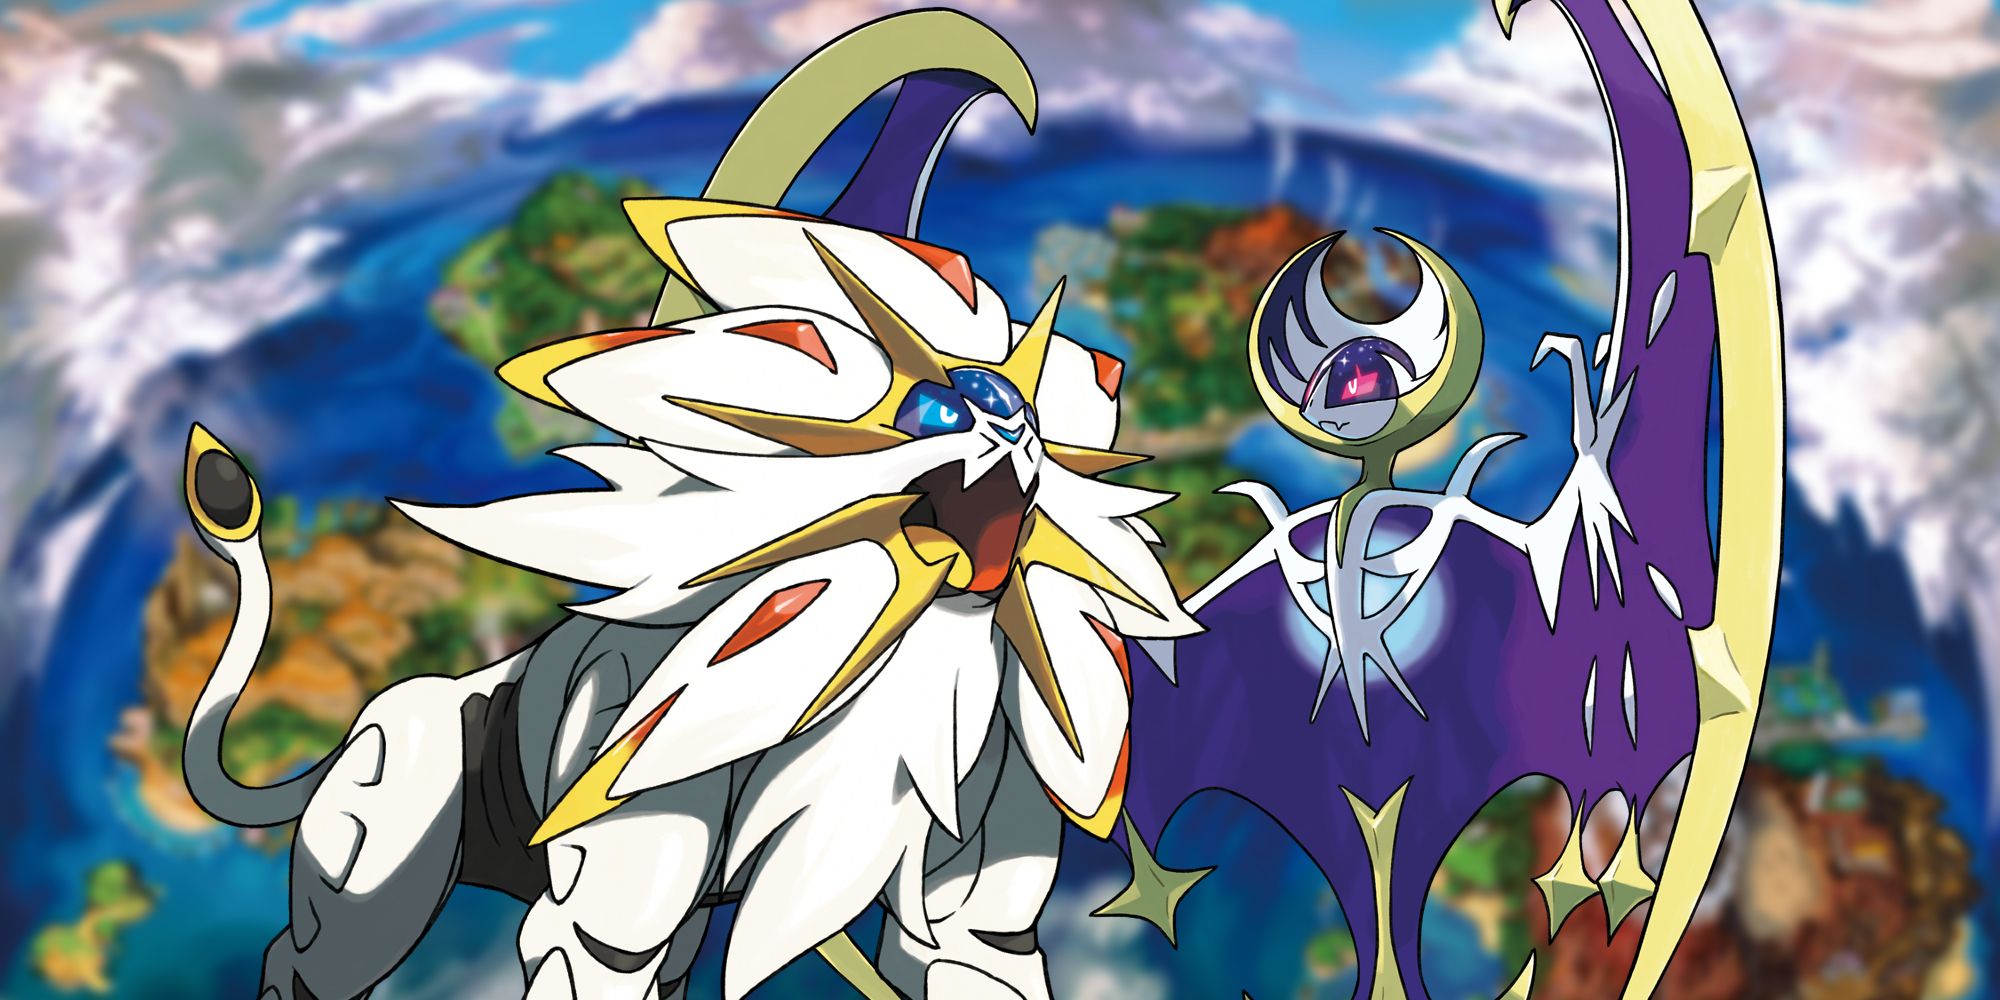 Pokémon's seventh generation is better than most players give it credit for.